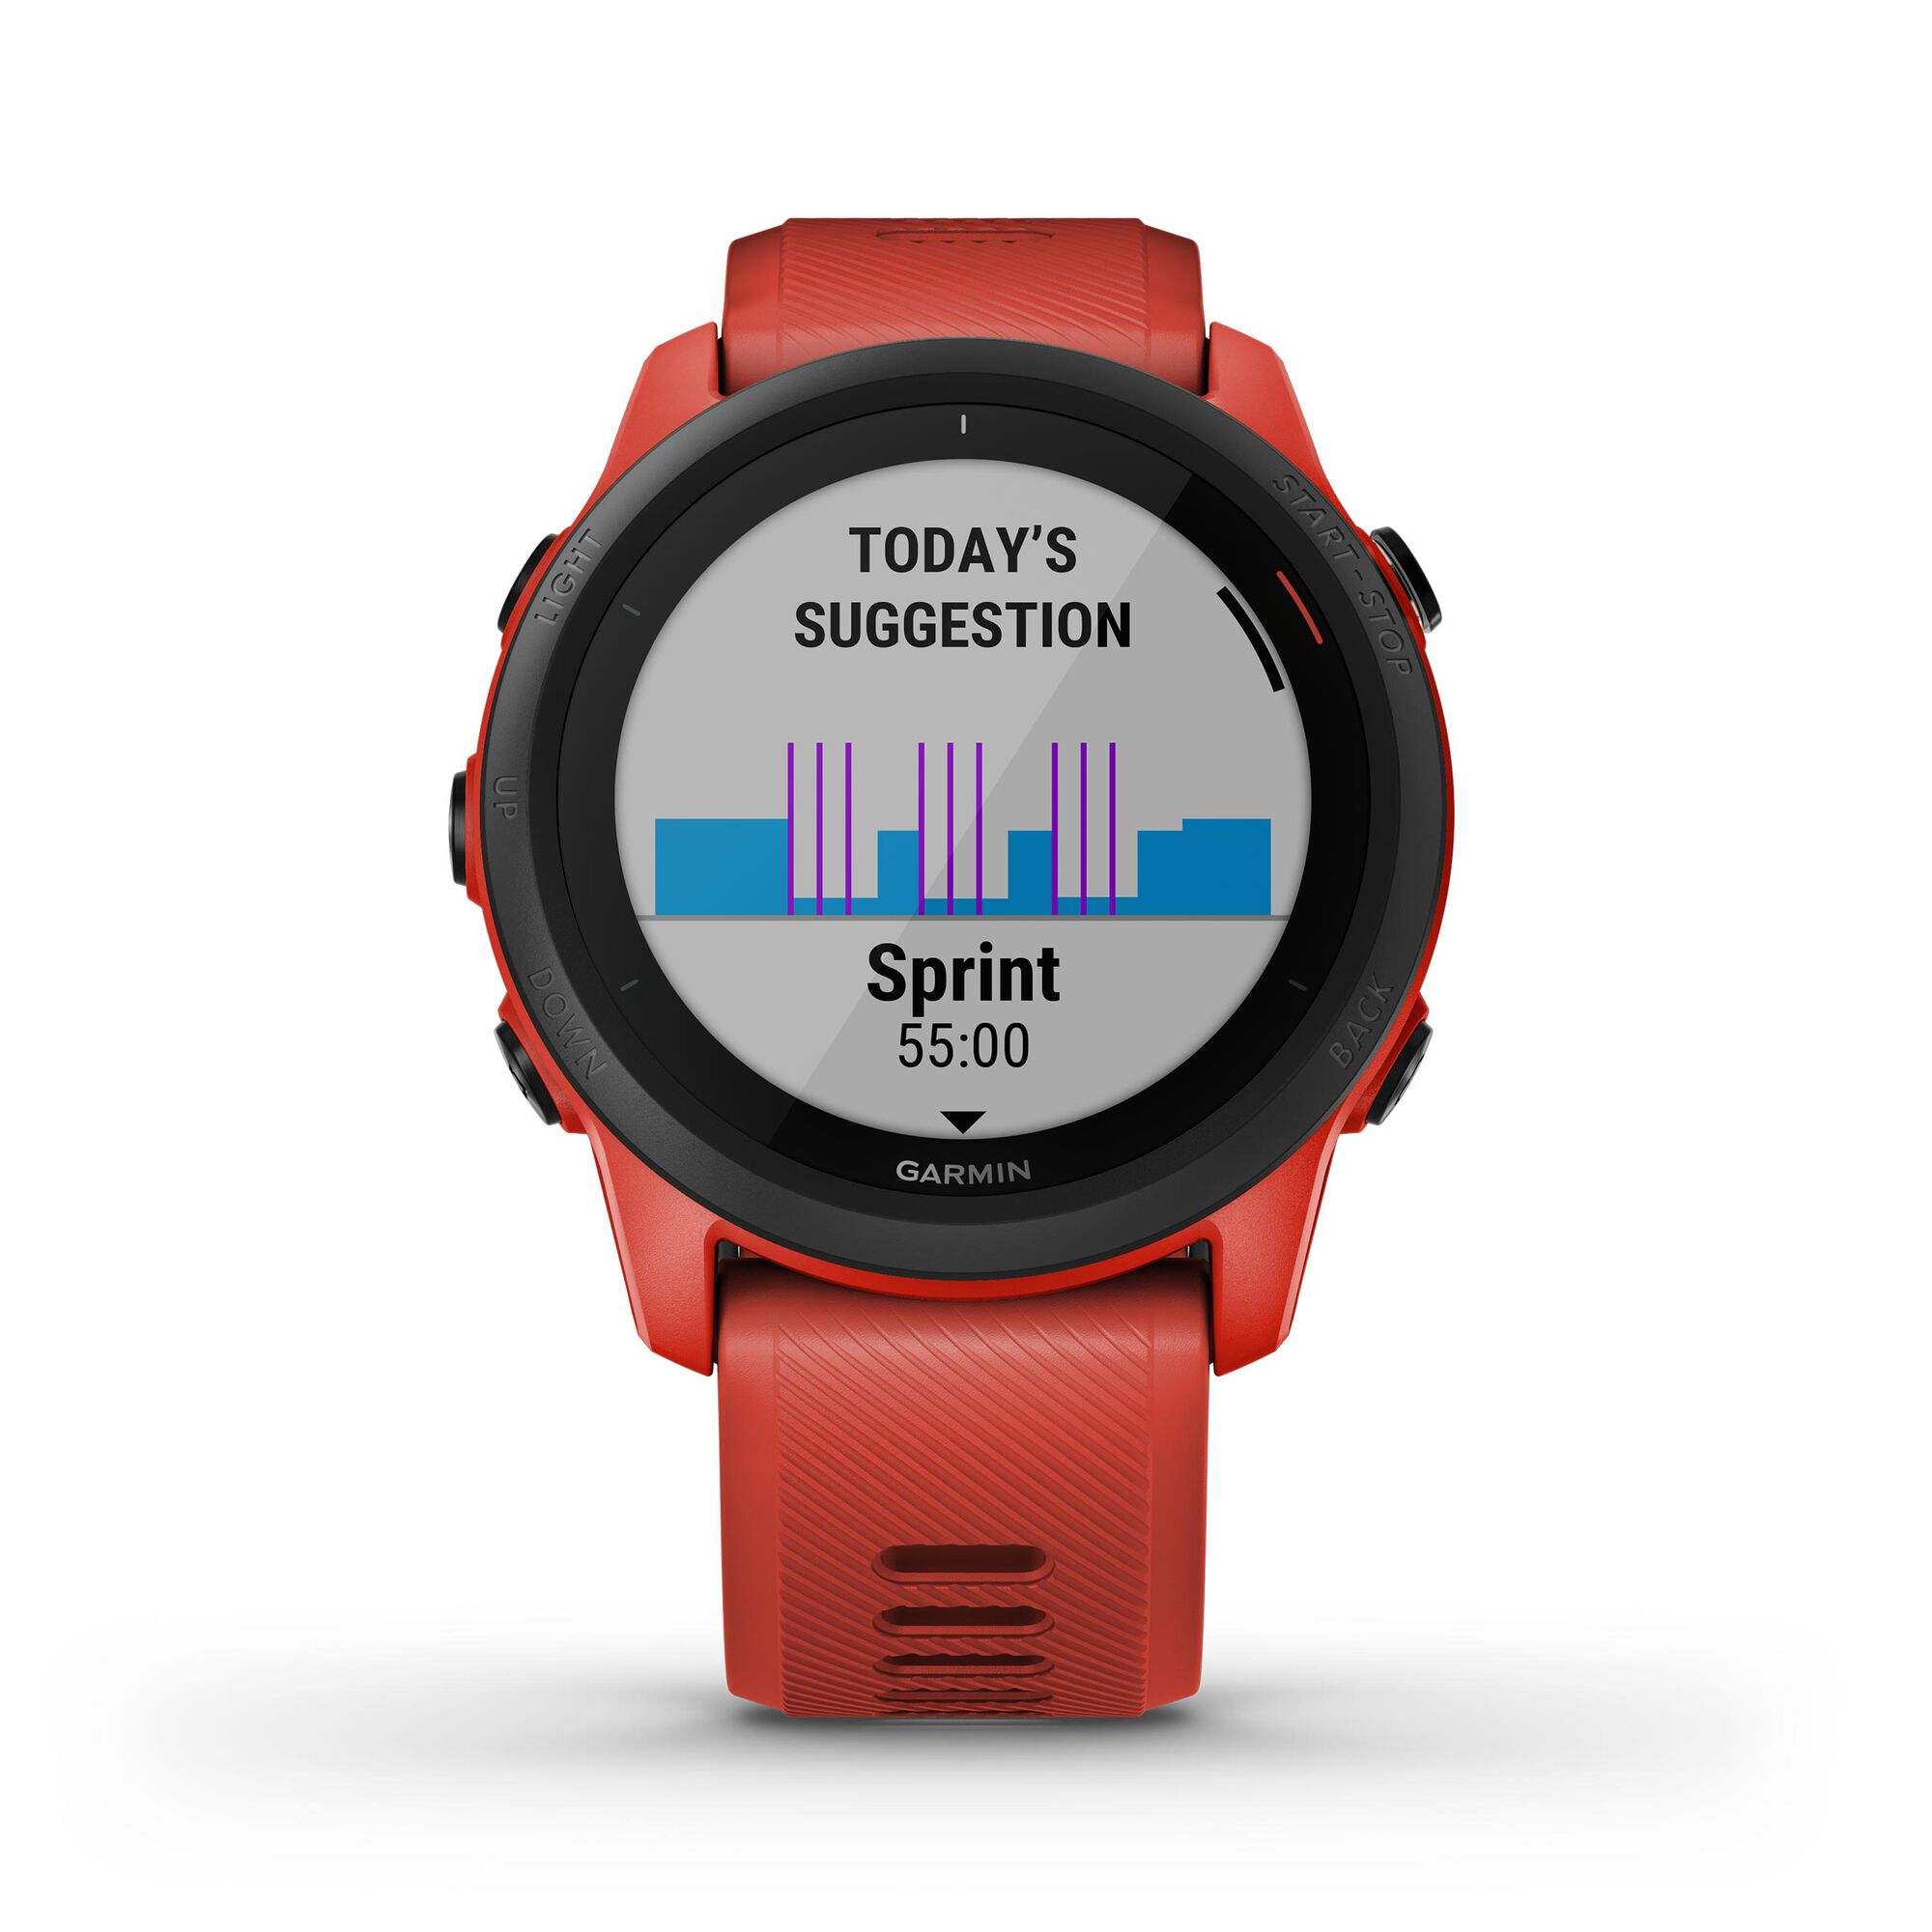 New Garmin Forerunner 745 will free you from your phone